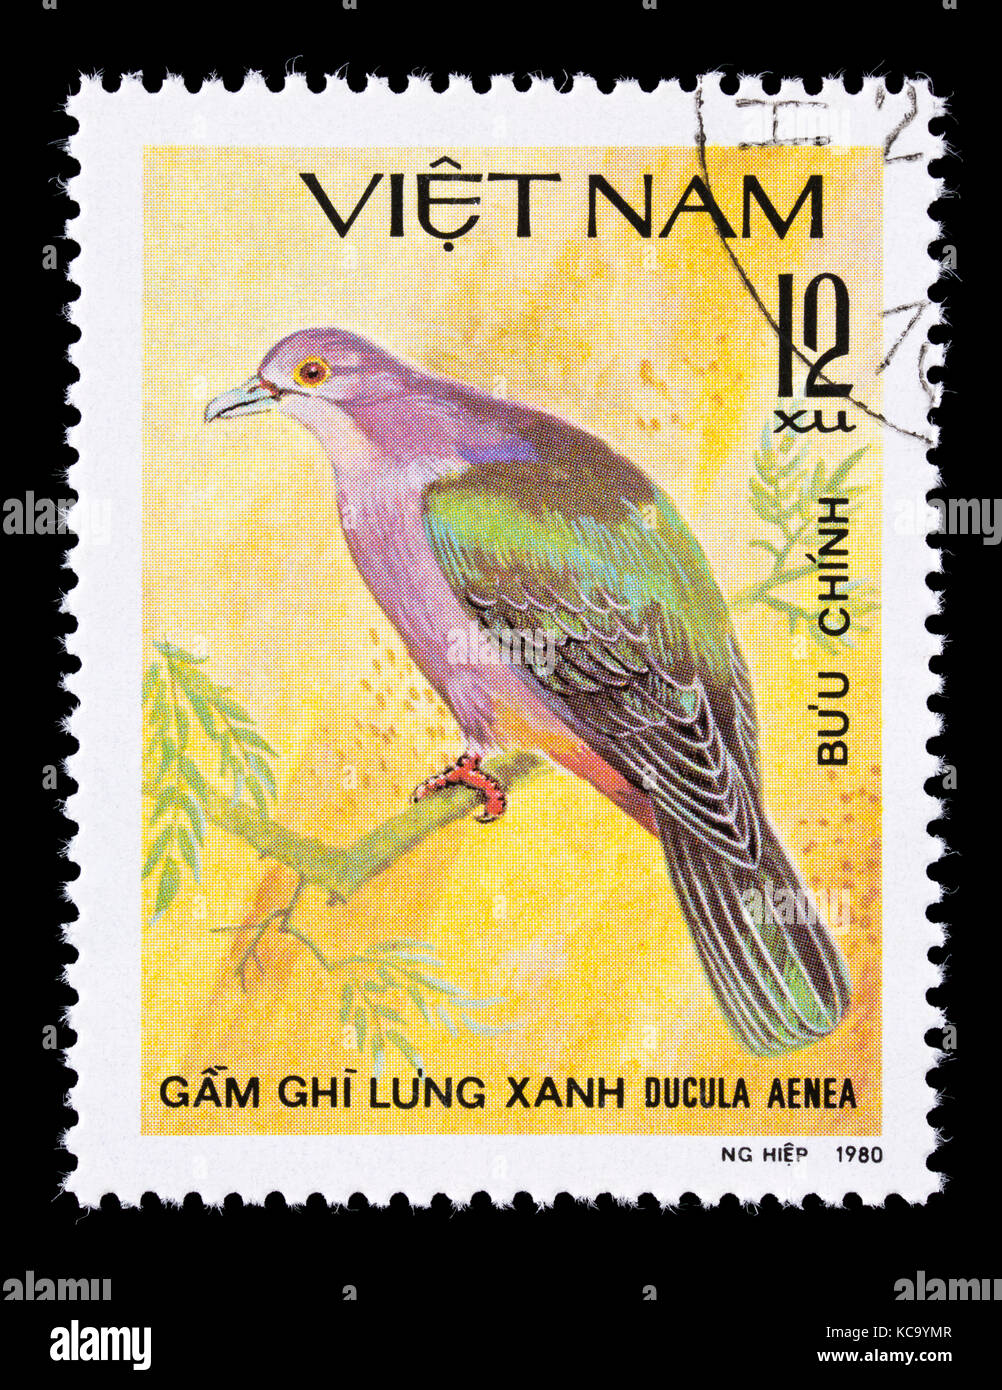 Postage stamp from Vietnam depicting a green imperial pigeon (Ducula aenea) Stock Photo